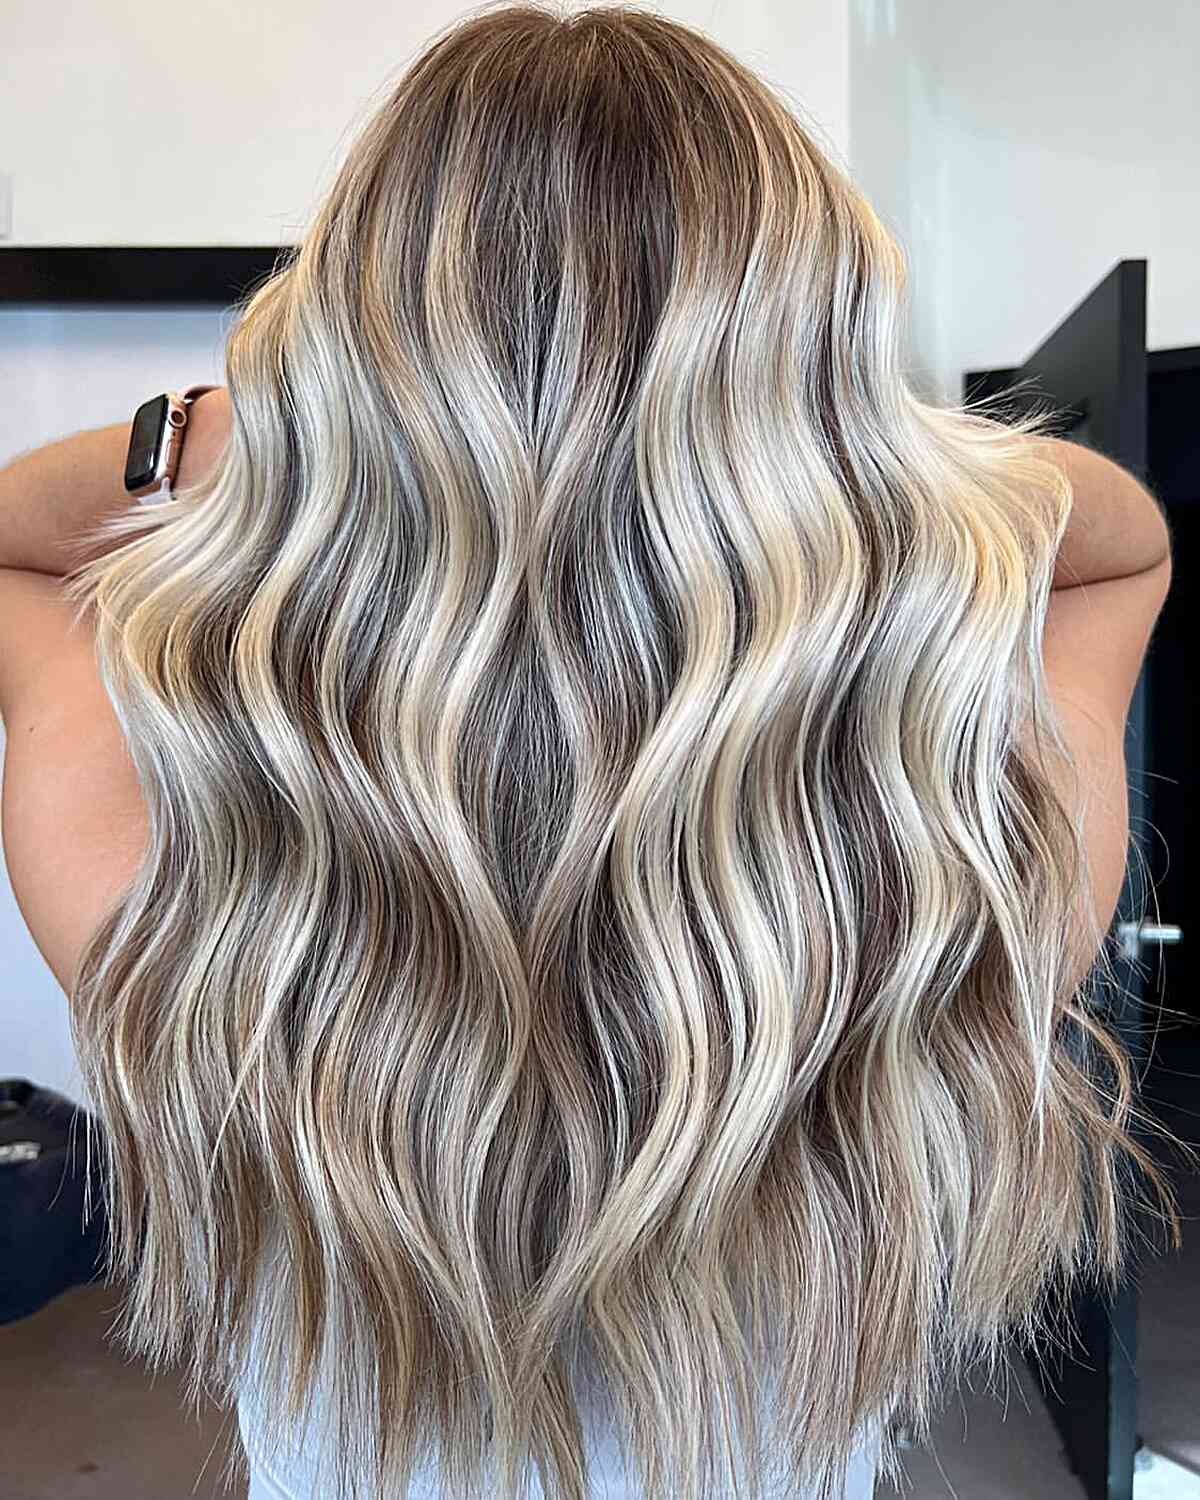 Creamy Icy Blonde Balayage Highlights on Long Light Brown Hair with Choppy Ends